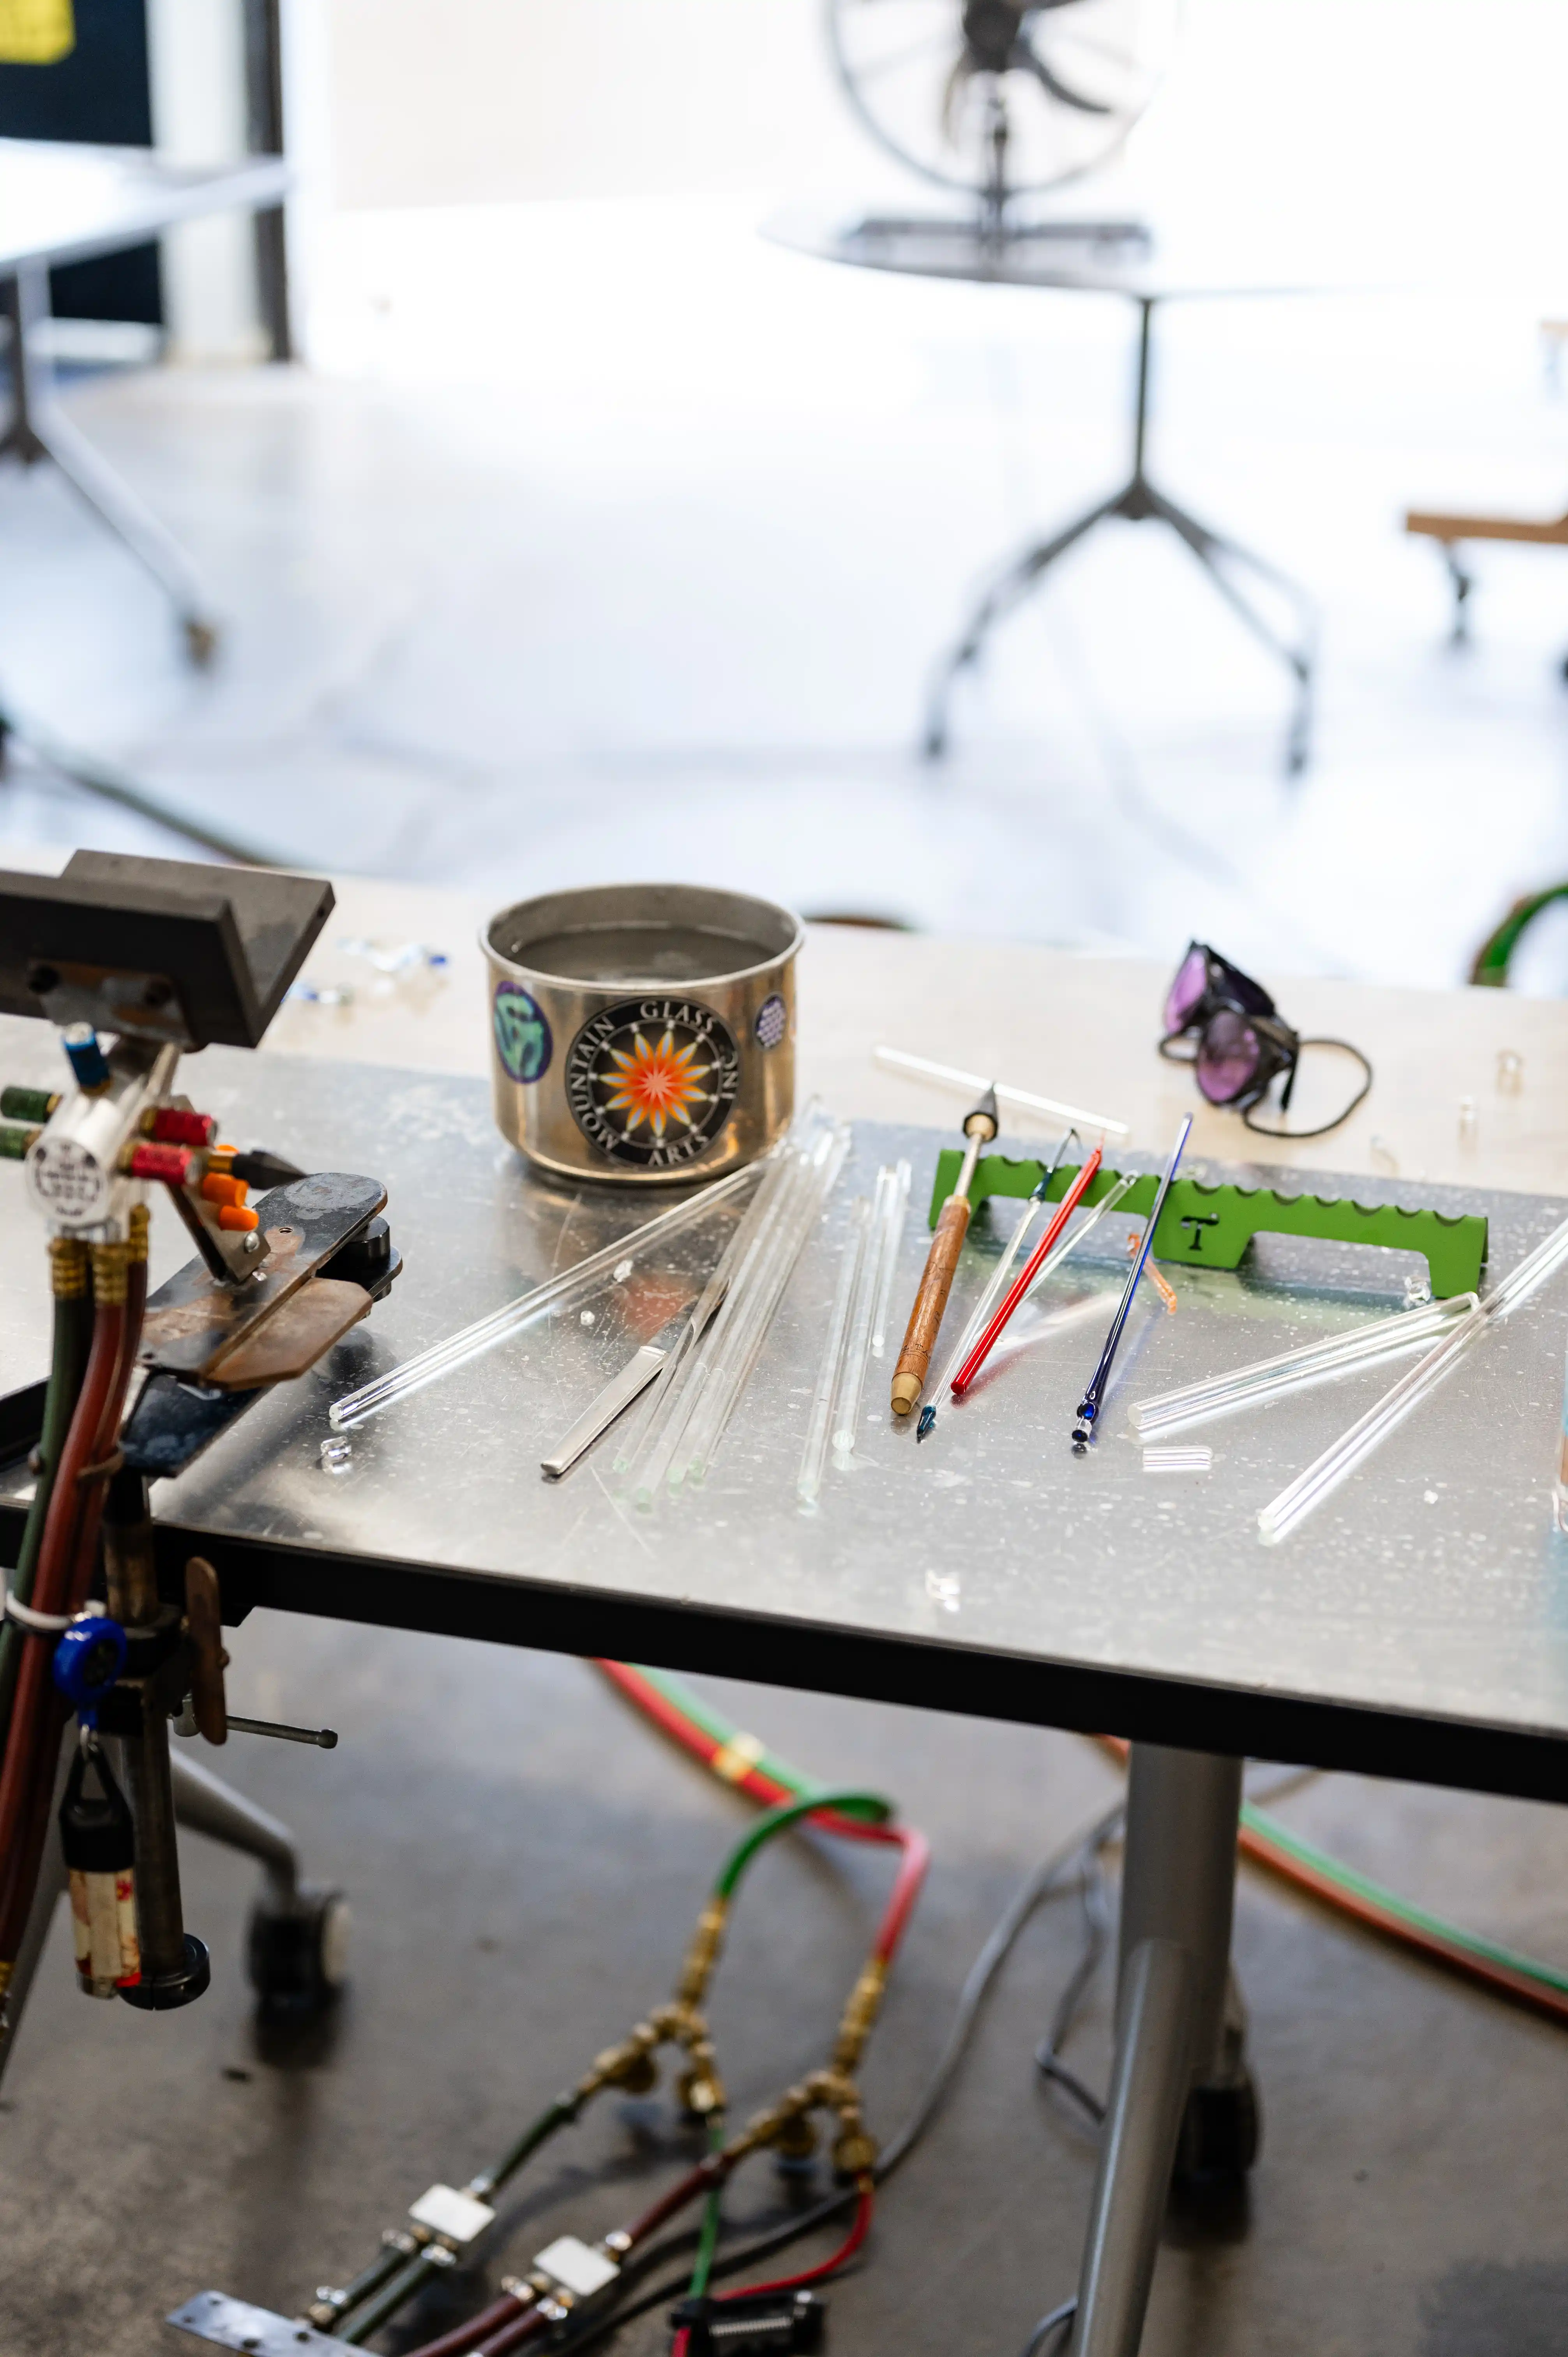 A glassblower's workbench with tools, glass rods, and a can with the studio's logo.